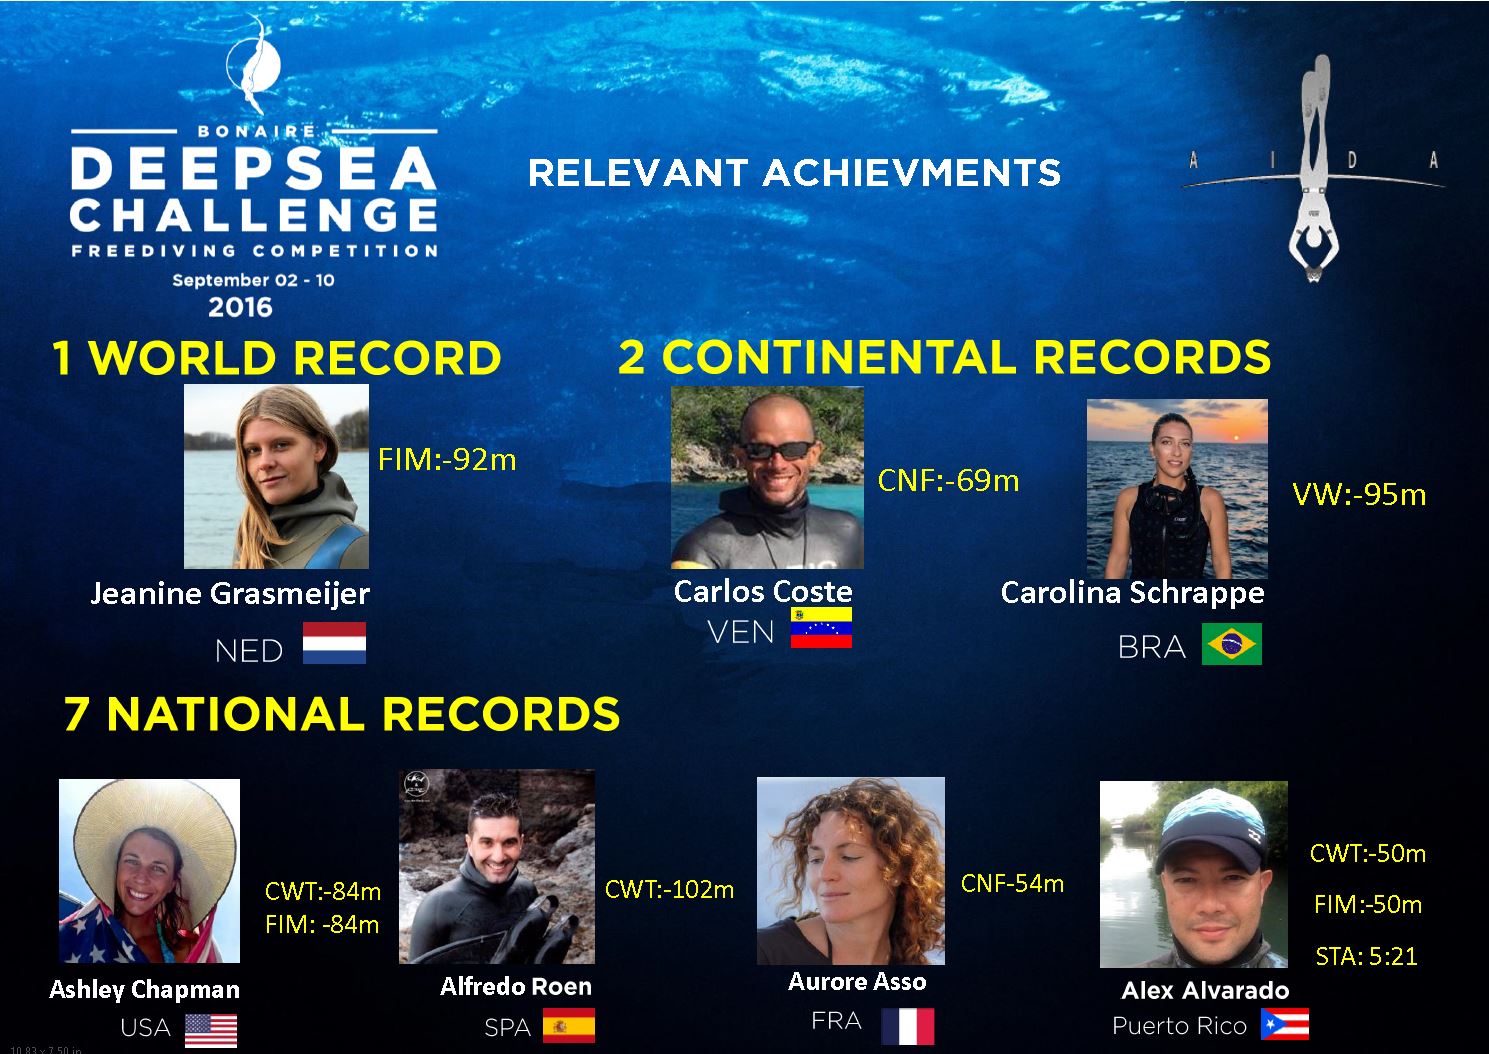 Carlos Coste sets two records during Bonaire DeepSea Challenge 2016 3